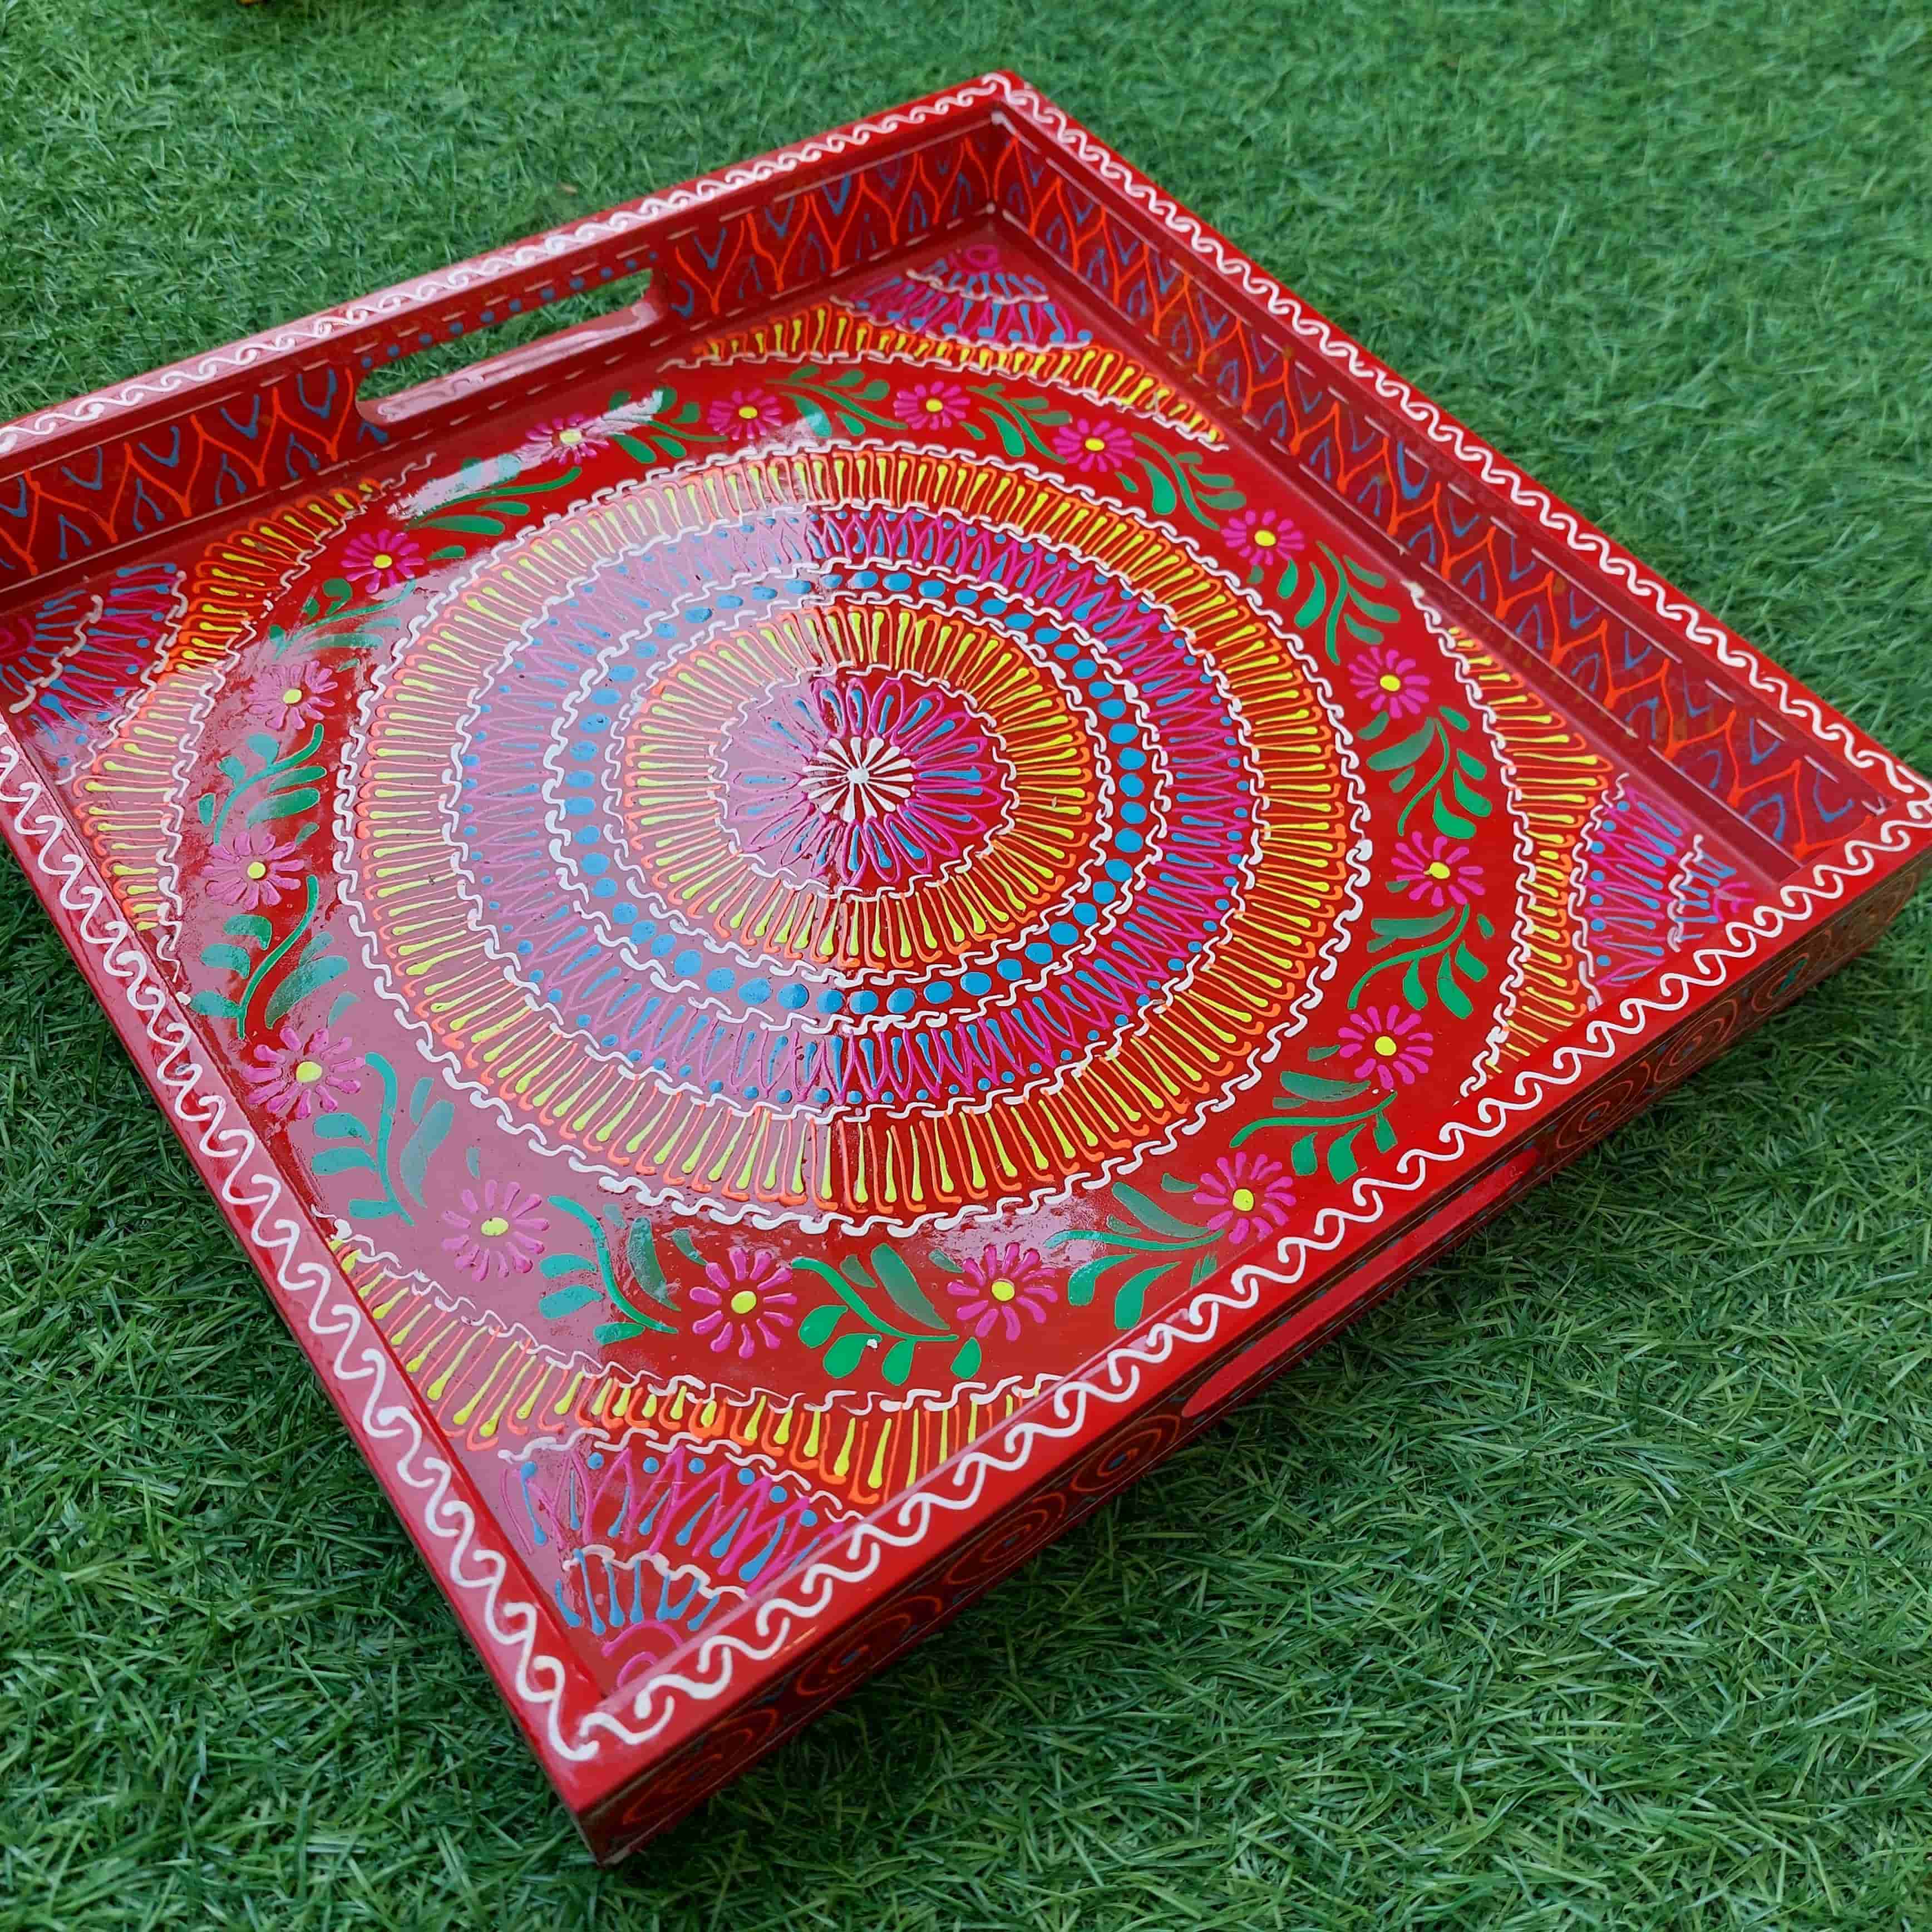 red-square-tray-in-truck-art-article-single-tray.-naksh-decor-kitchen-decor-trays-truck-art-1